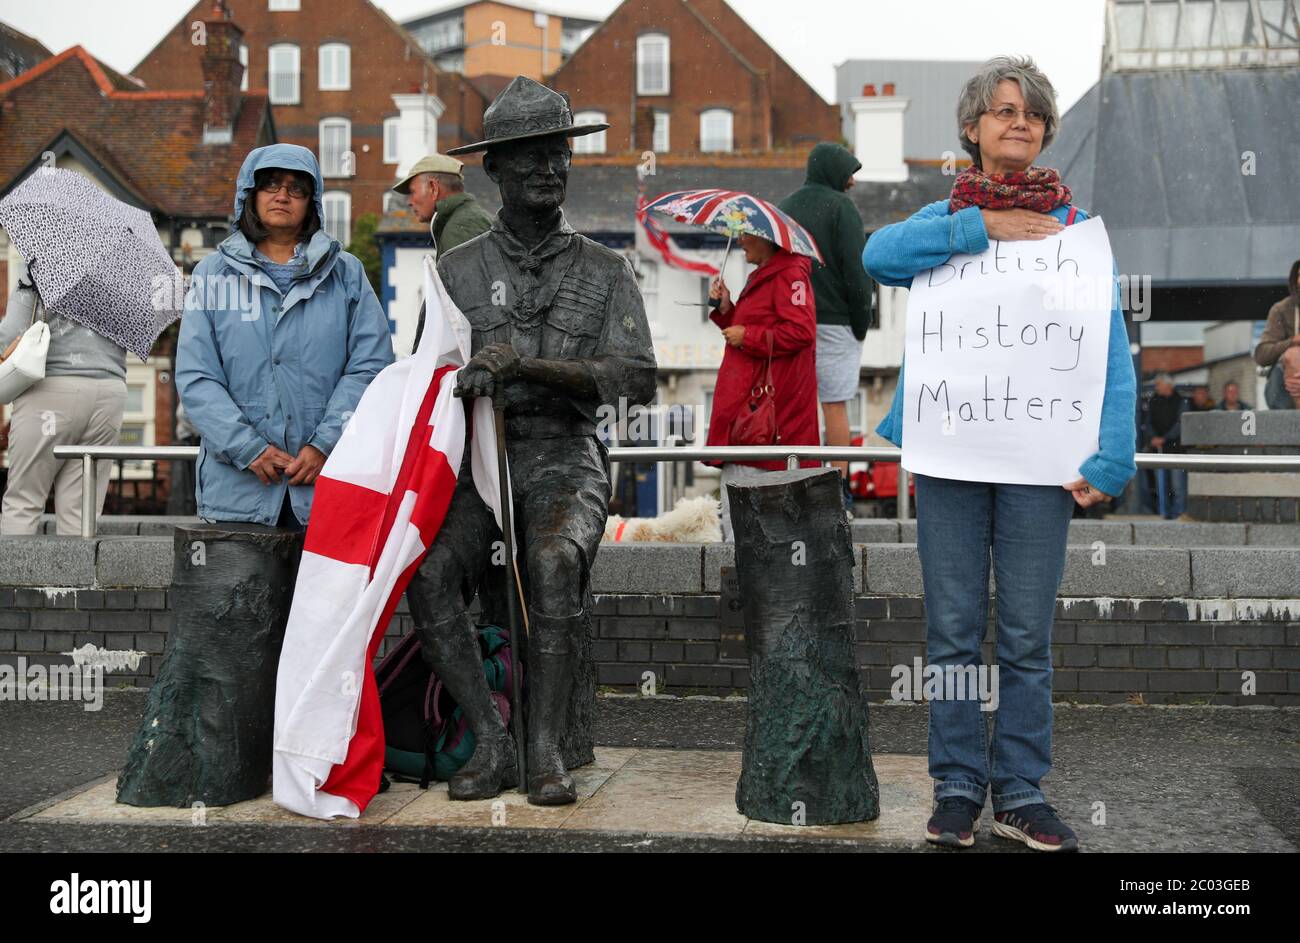 Locals show their support for a statue of Robert Baden-Powell on Poole Quay in Dorset ahead of its expected removal to 'safe storage' following concerns about his actions while in the military and 'Nazi sympathies'. The action follows a raft of Black Lives Matter protests across the UK, sparked by the death of George Floyd, who was killed on May 25 while in police custody in the US city of Minneapolis. Stock Photo